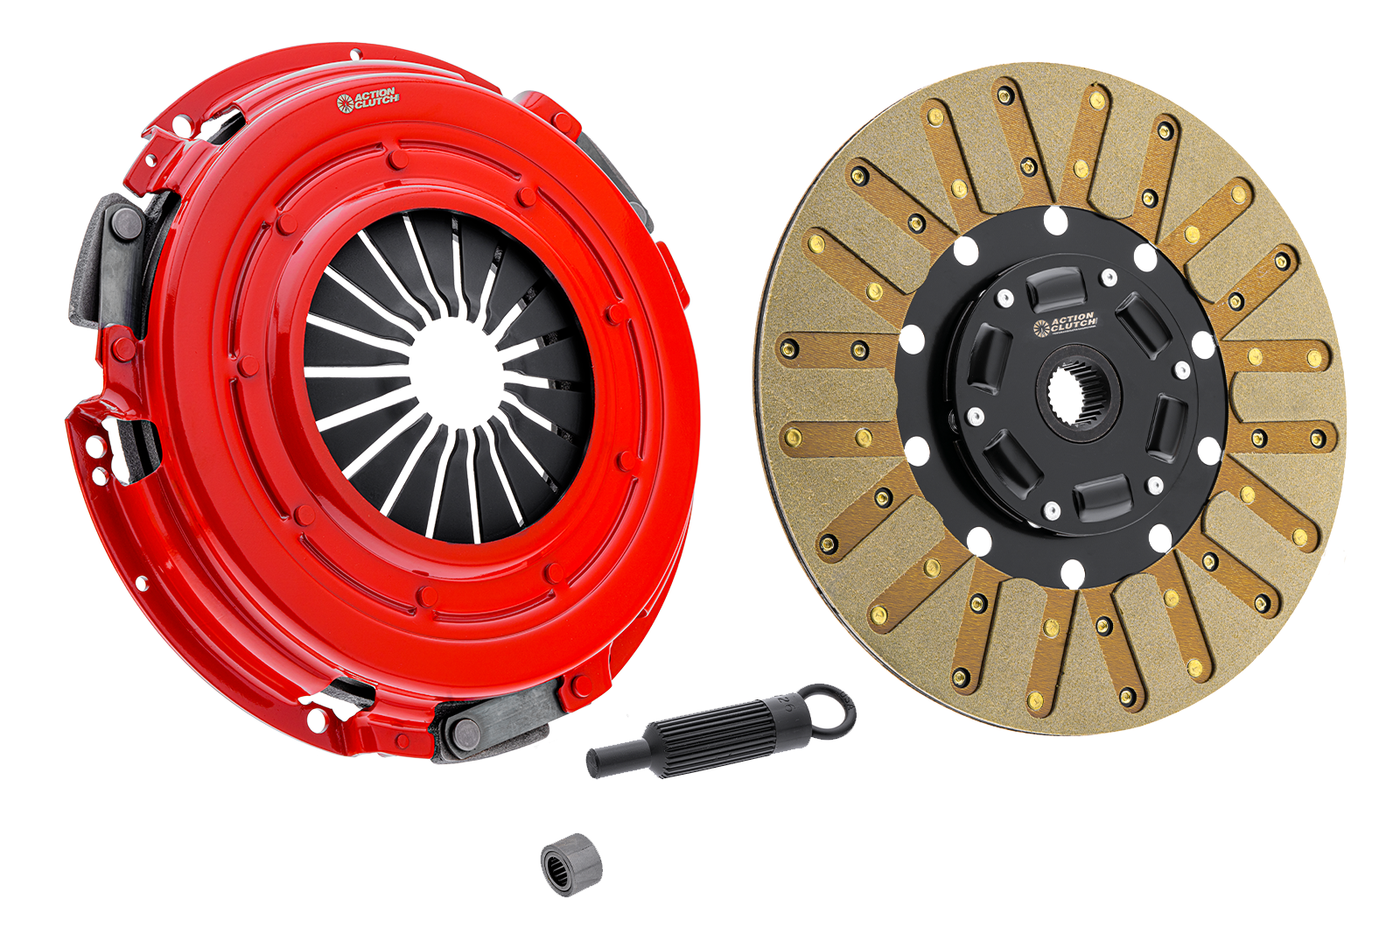 Stage 2 Clutch Kit (1KS) for Chevrolet Corvette 1997-2004 5.7L (LS1) Without Slave and Release Bearing